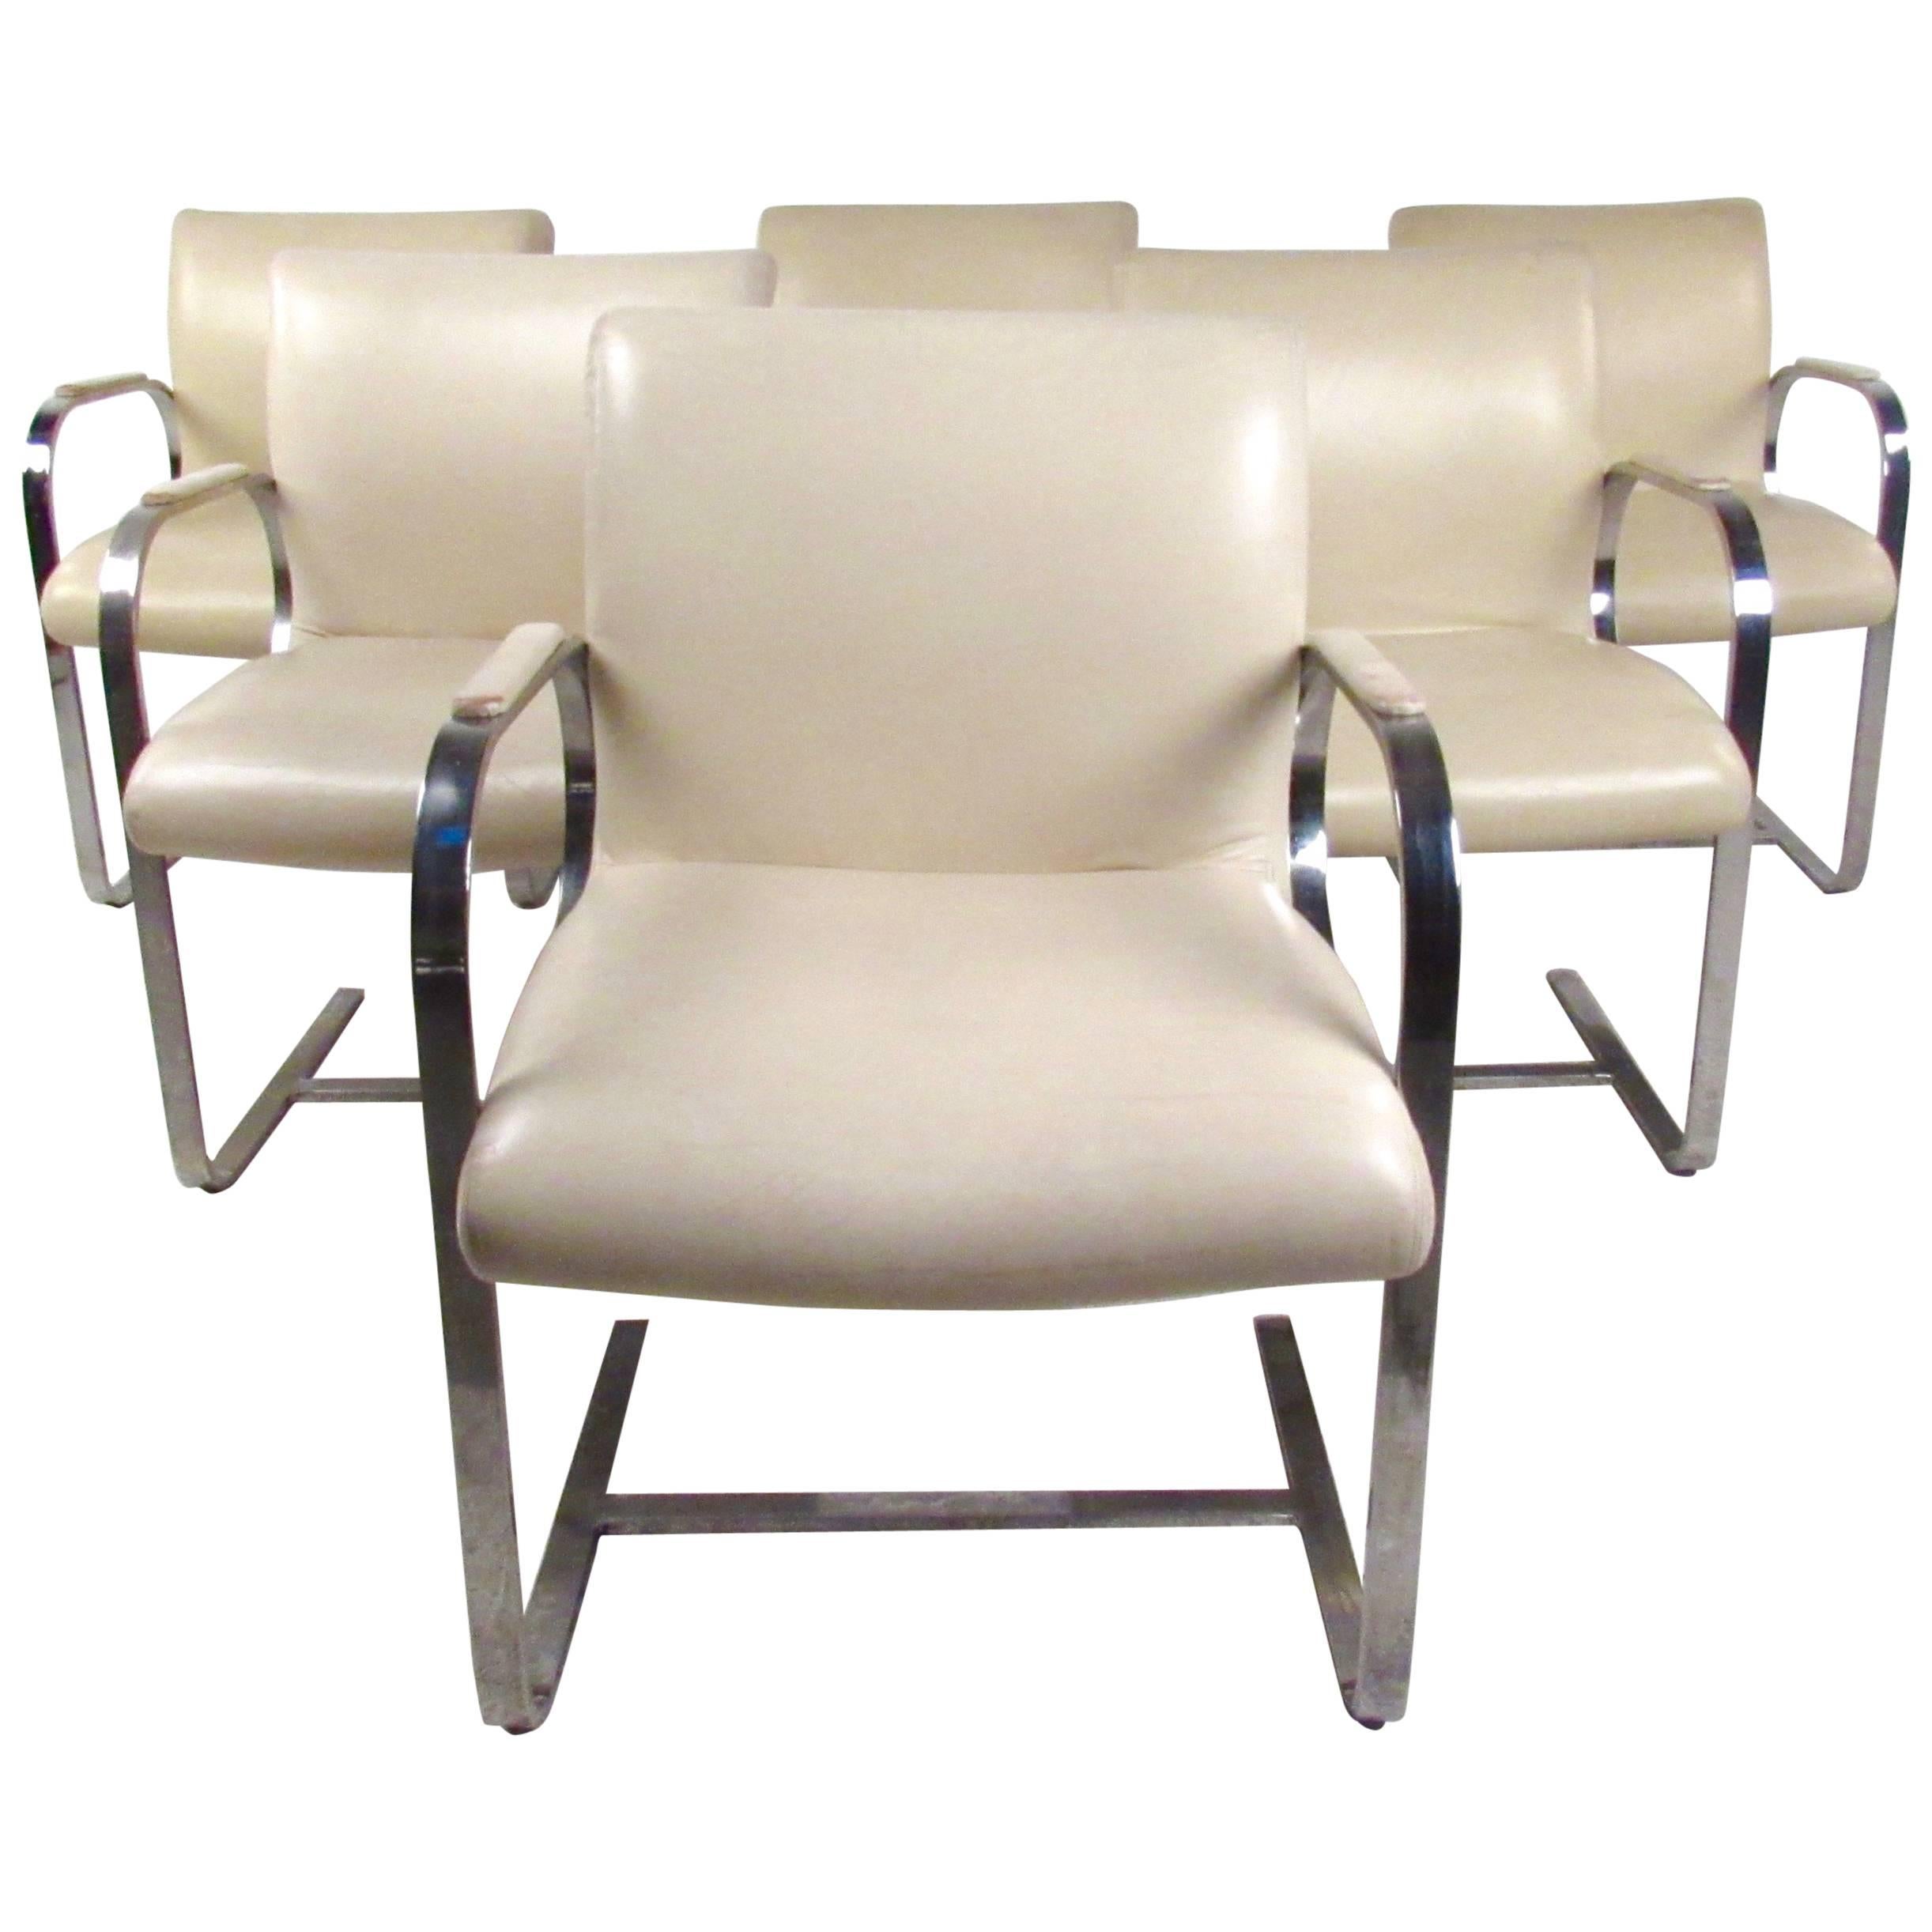 Mid-Century Modern Mies van der Rohe Brno Style Dining Chairs